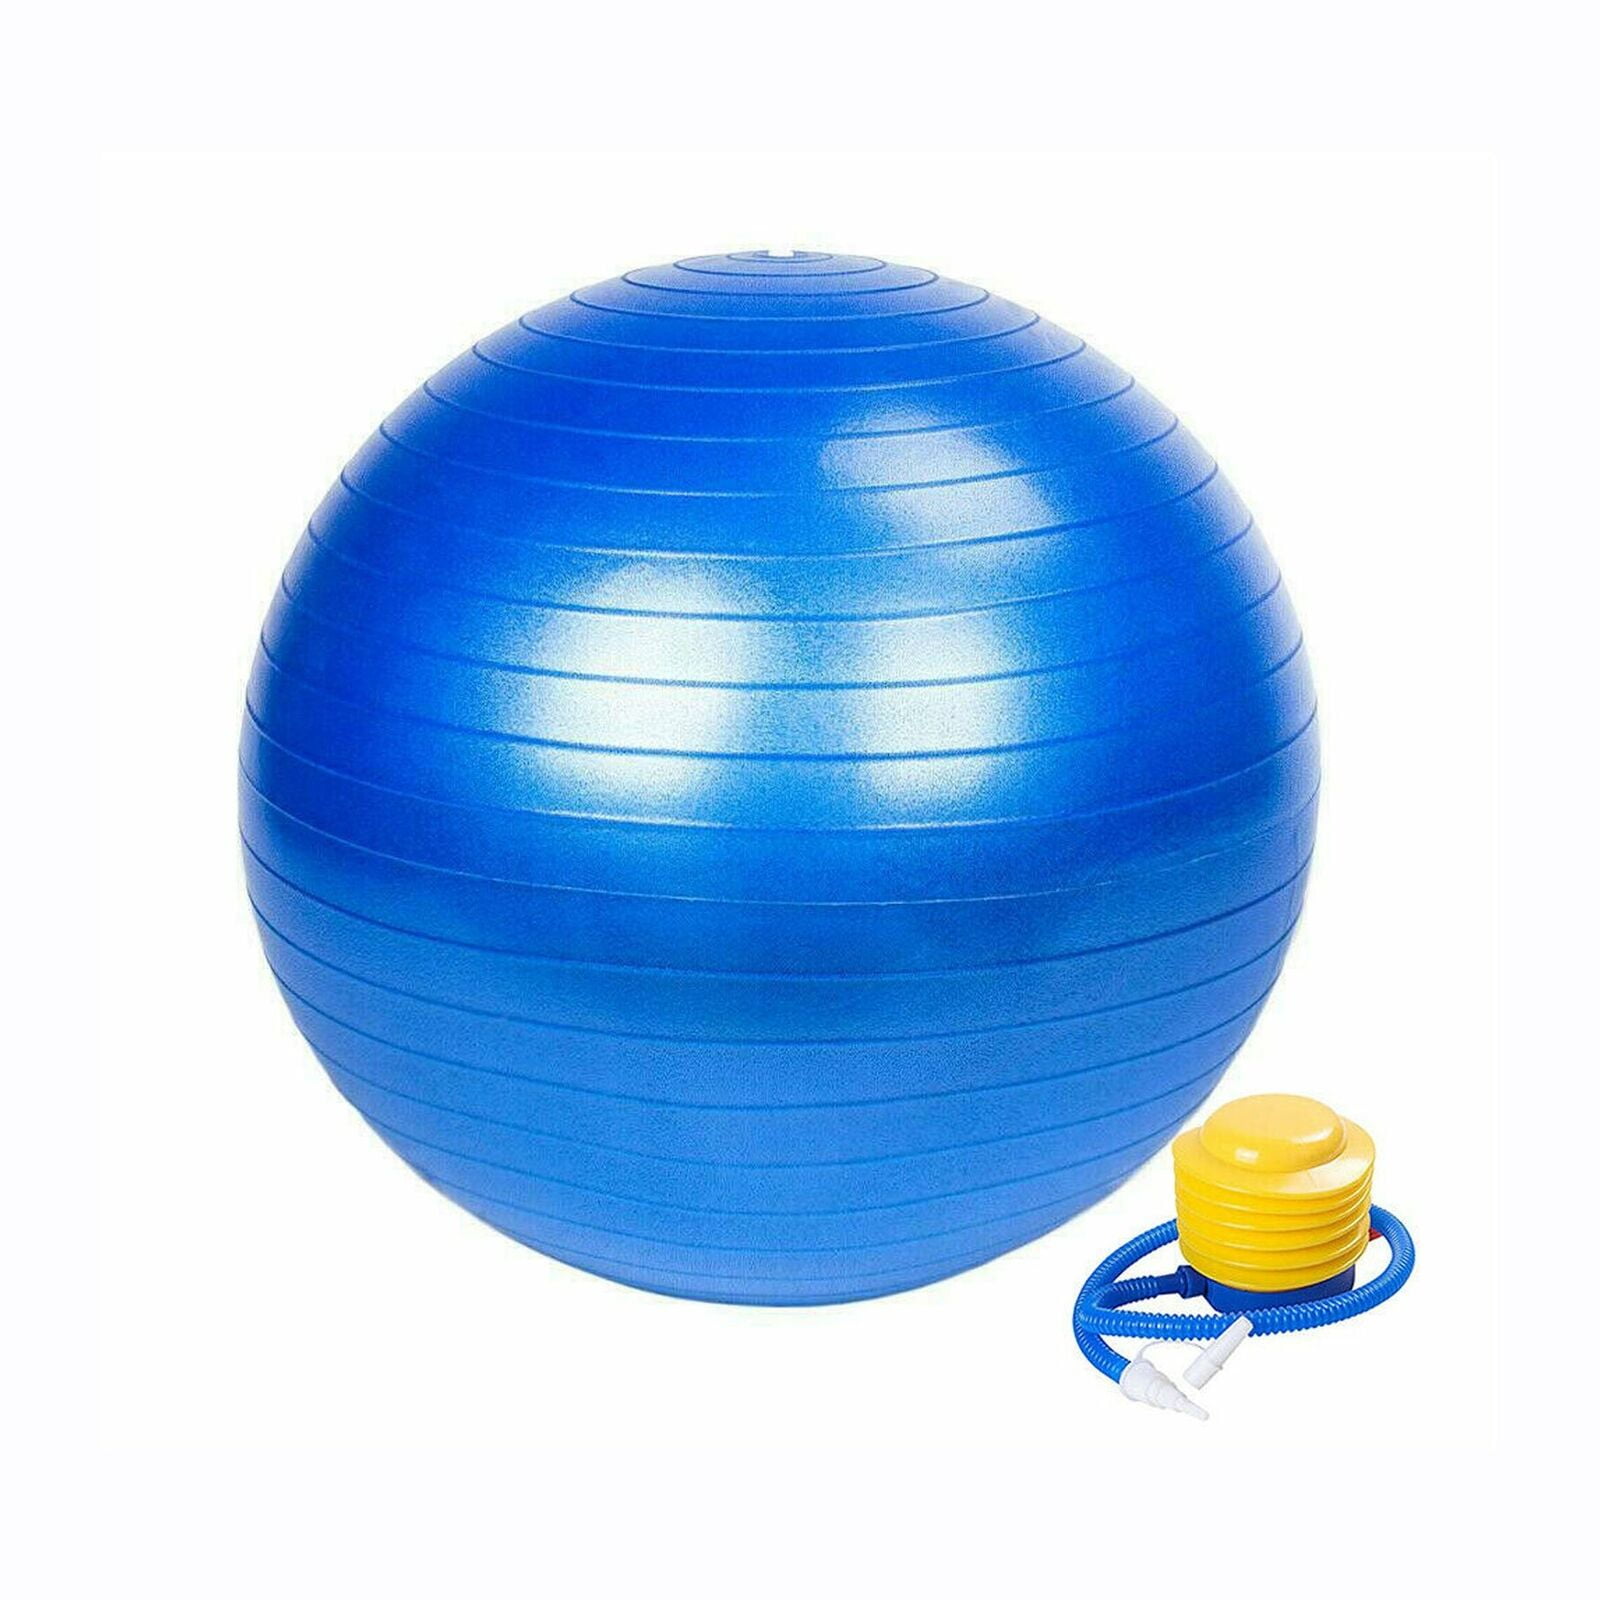 Details about   Exercise Workout Yoga Ball Fitness Pilates Sculpting Balance Include Pump Gym 